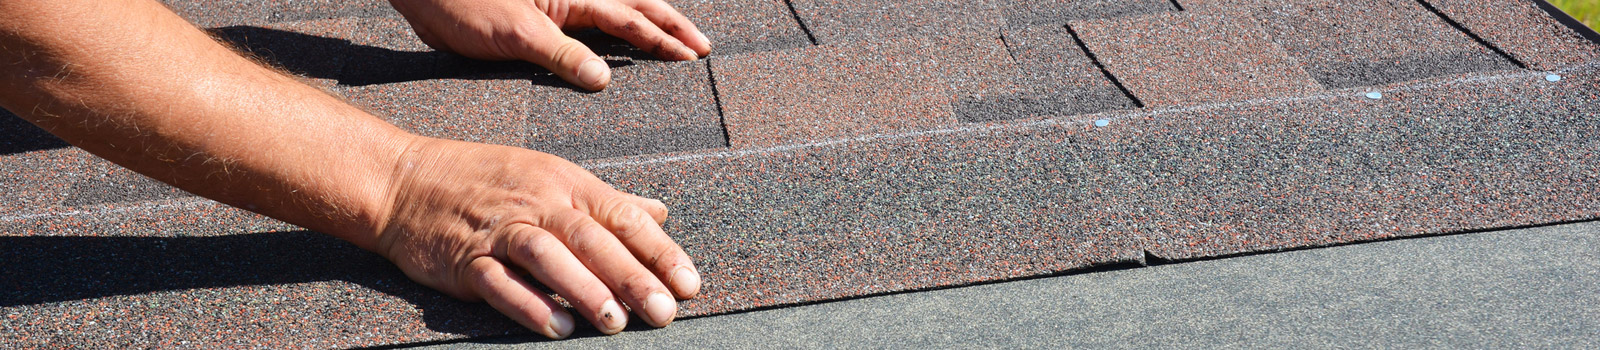 Idaho roof replacement services for Boise, Meridian, Caldwell, Eagle and Emmett Idaho.